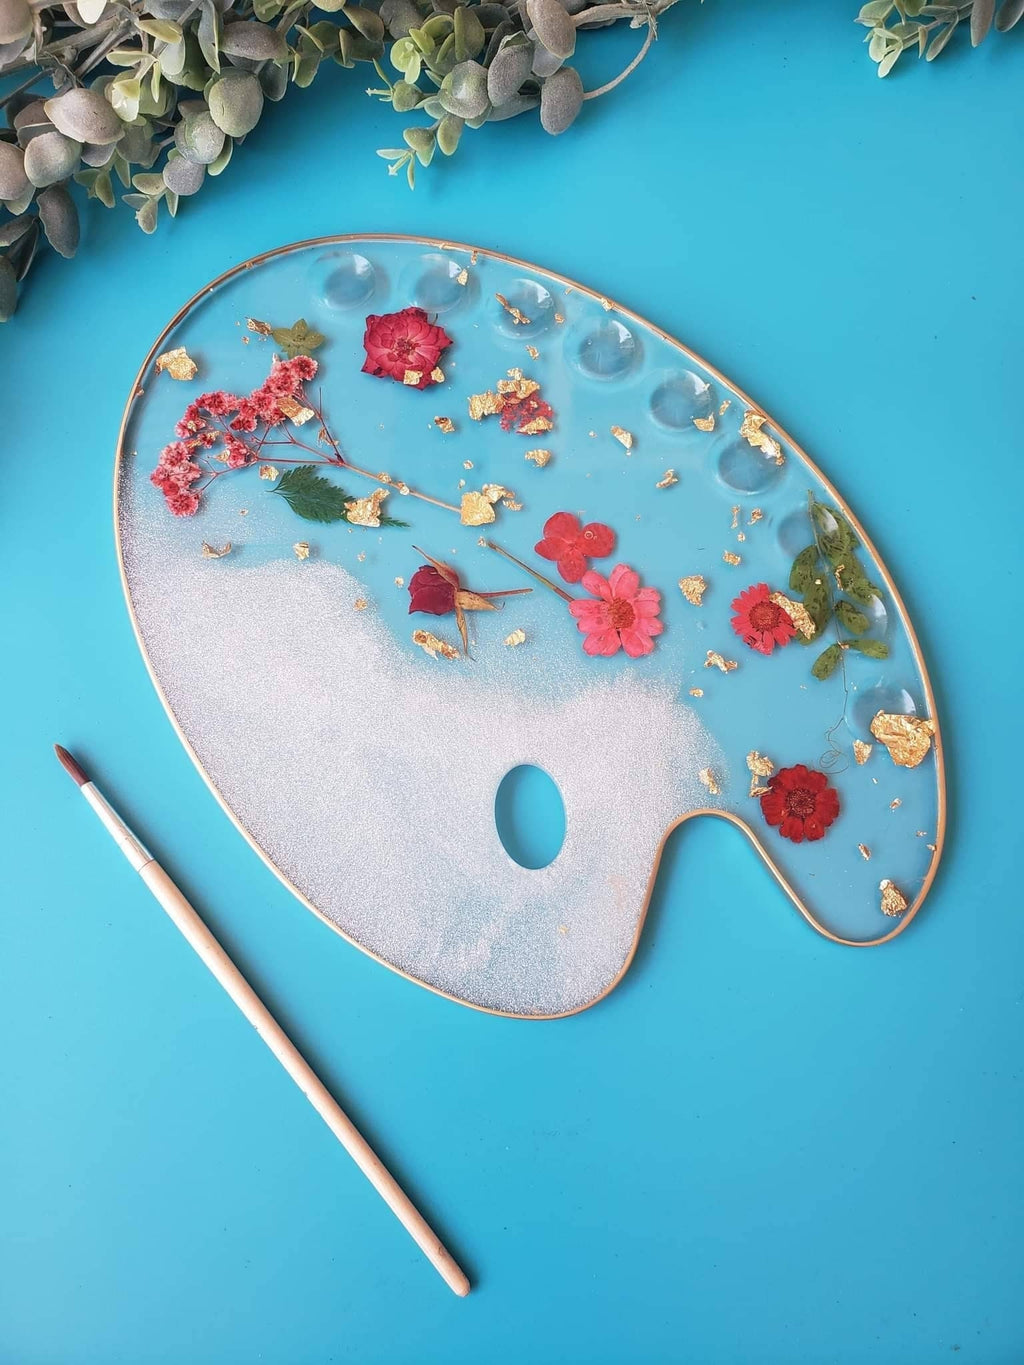 Ethereal Mirrors Are Adorned With Pressed Flowers and Resin Art